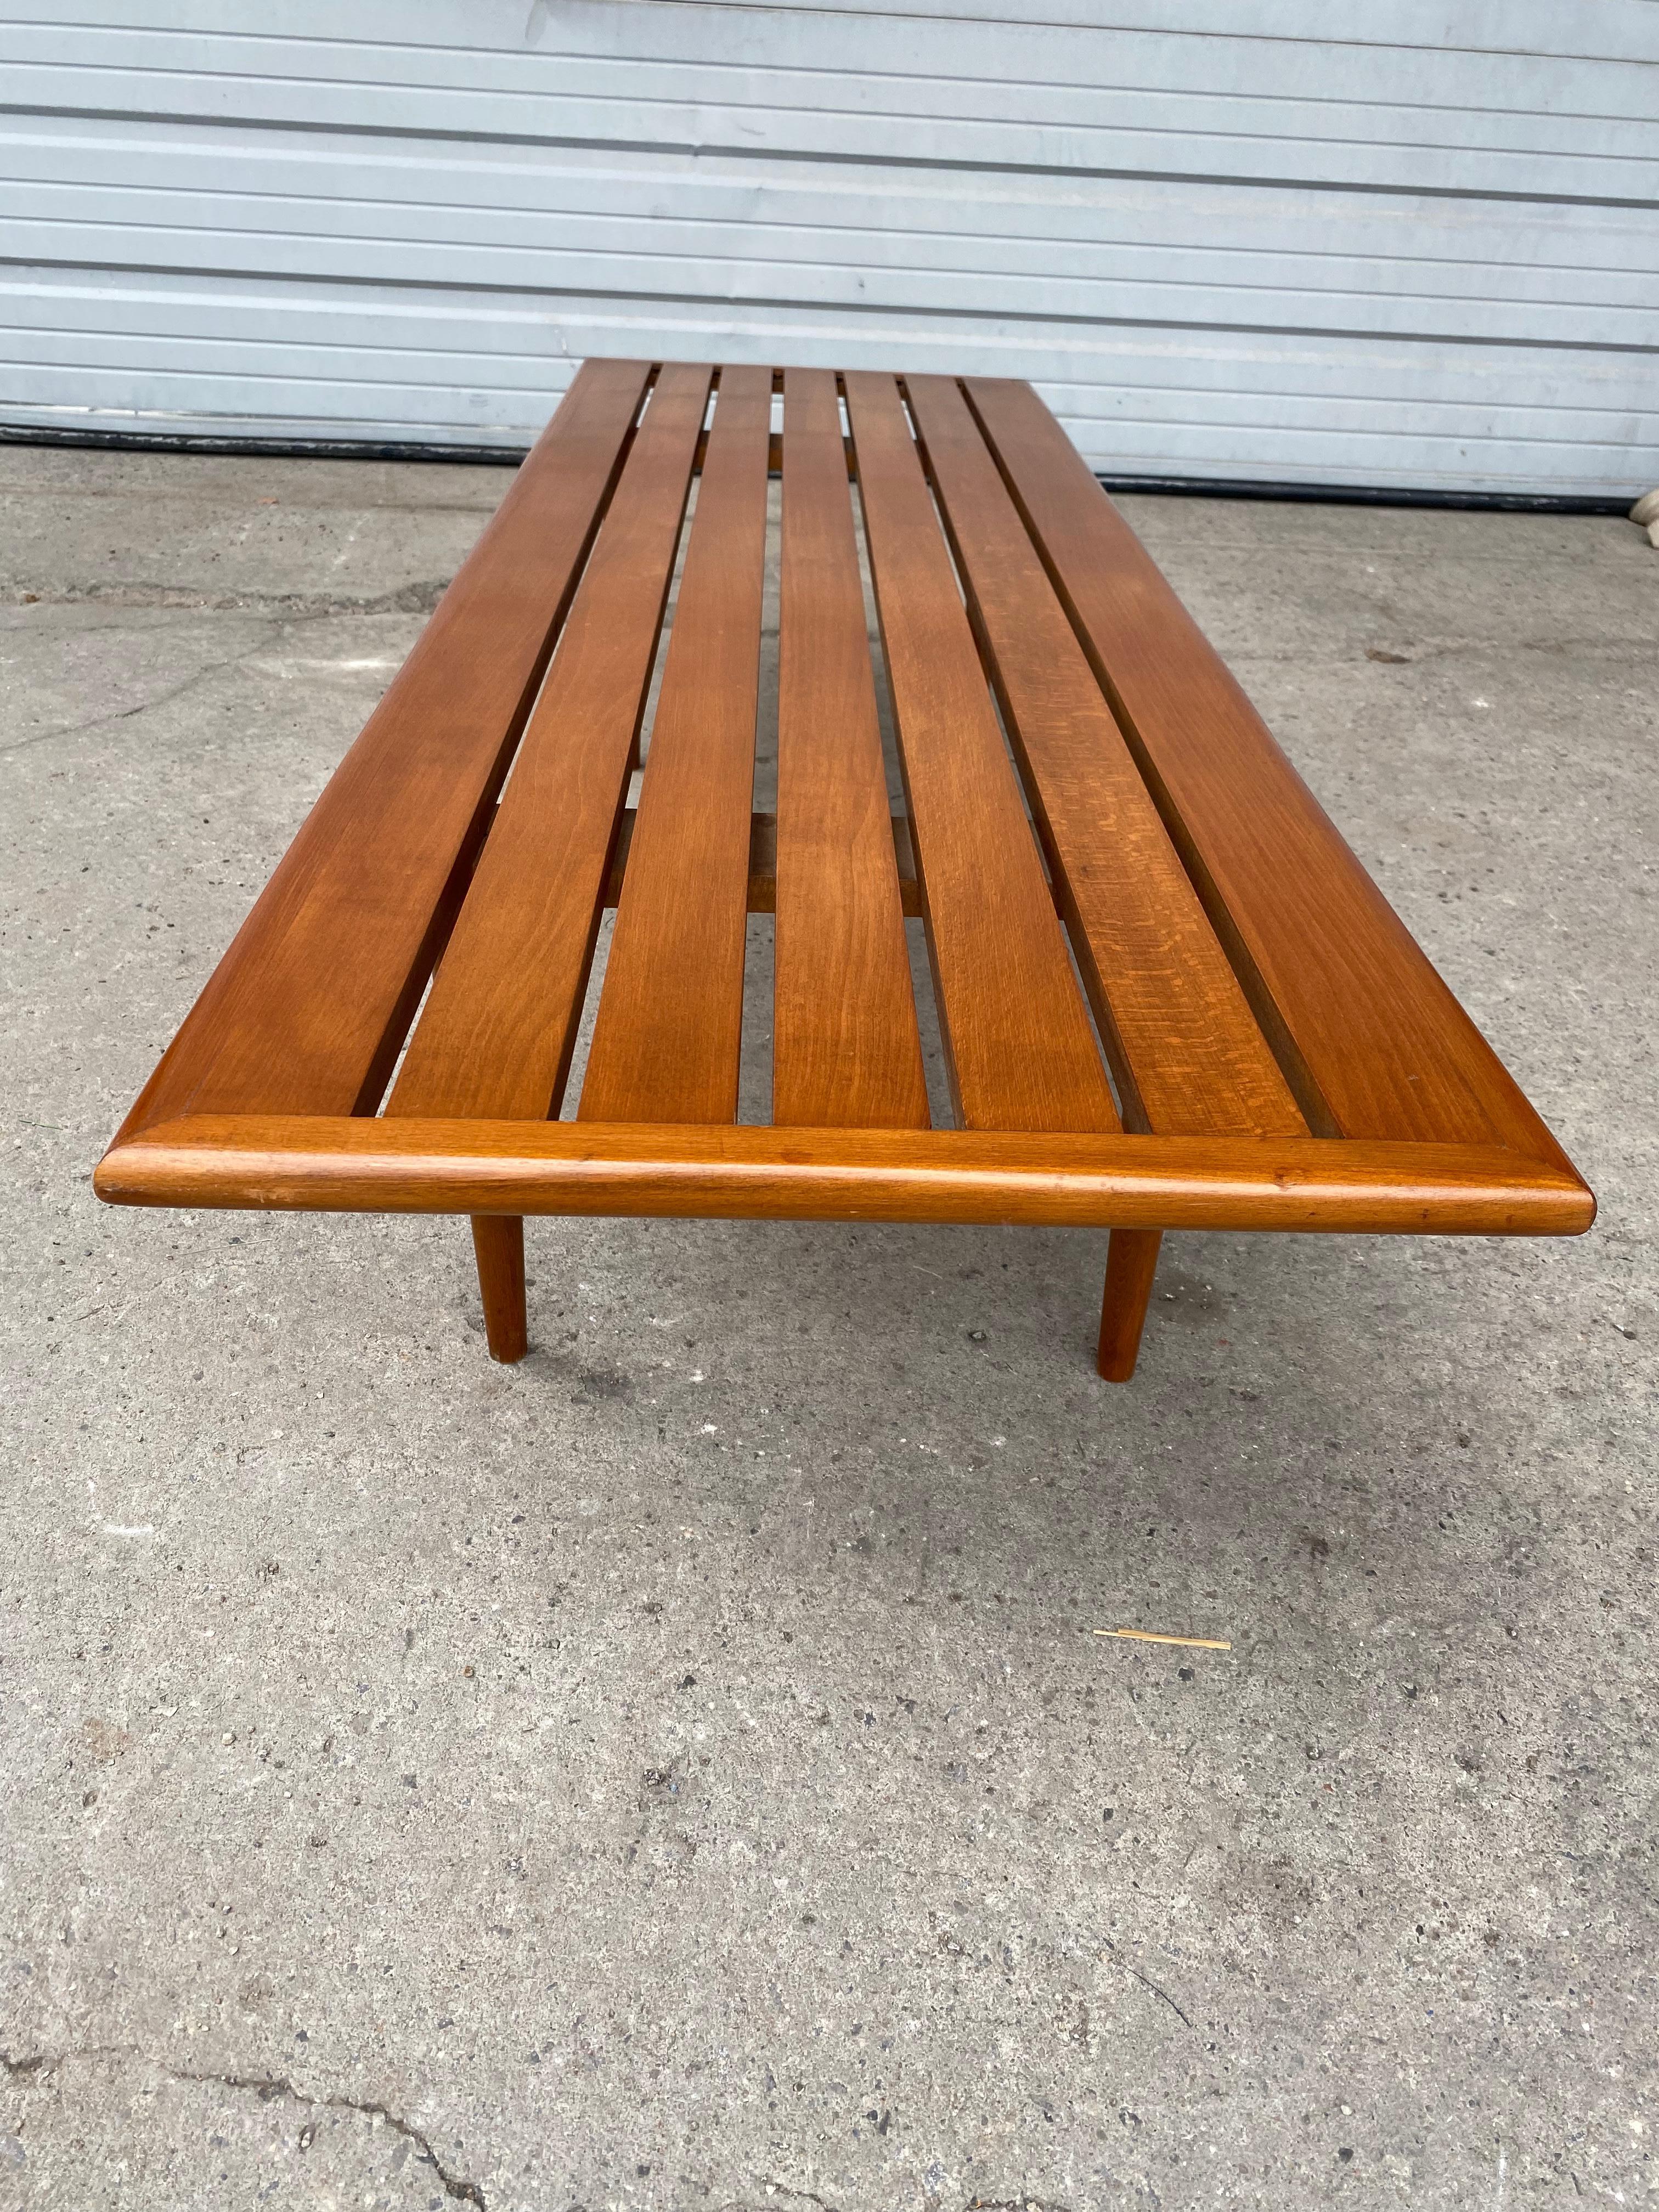 Elegant mid century modernist coffee table/ slat bench..,, simple, sleek design, wonderful quality and construction. Retains original finish, patina, fit seamlessly into any modern, contemporary environment. Hand delivery avail to new York City or